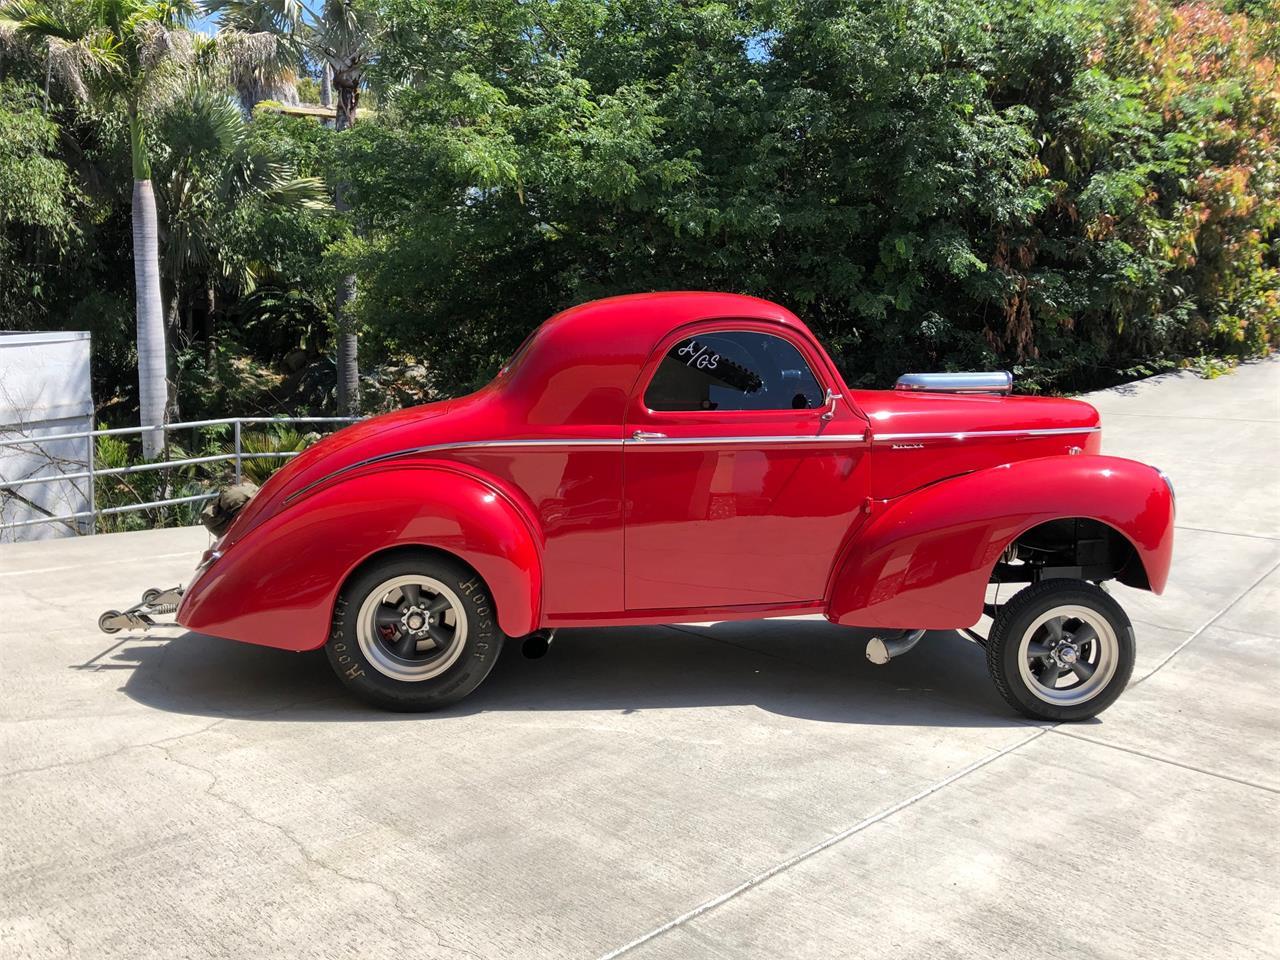 1940 Willys Coupe in grants pass, Oregon